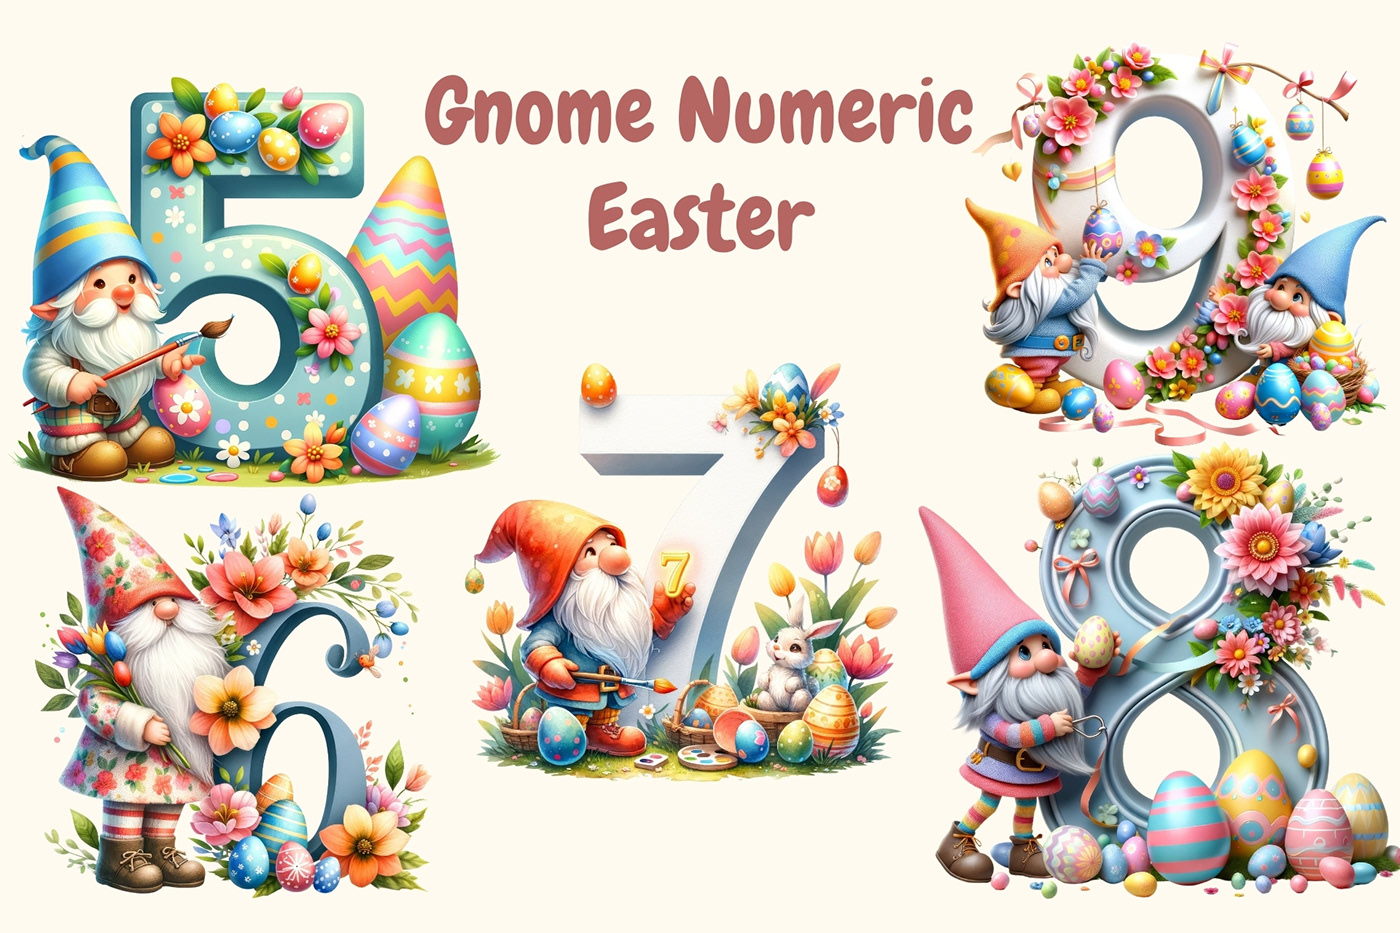 numbers watercolor gnome Easter